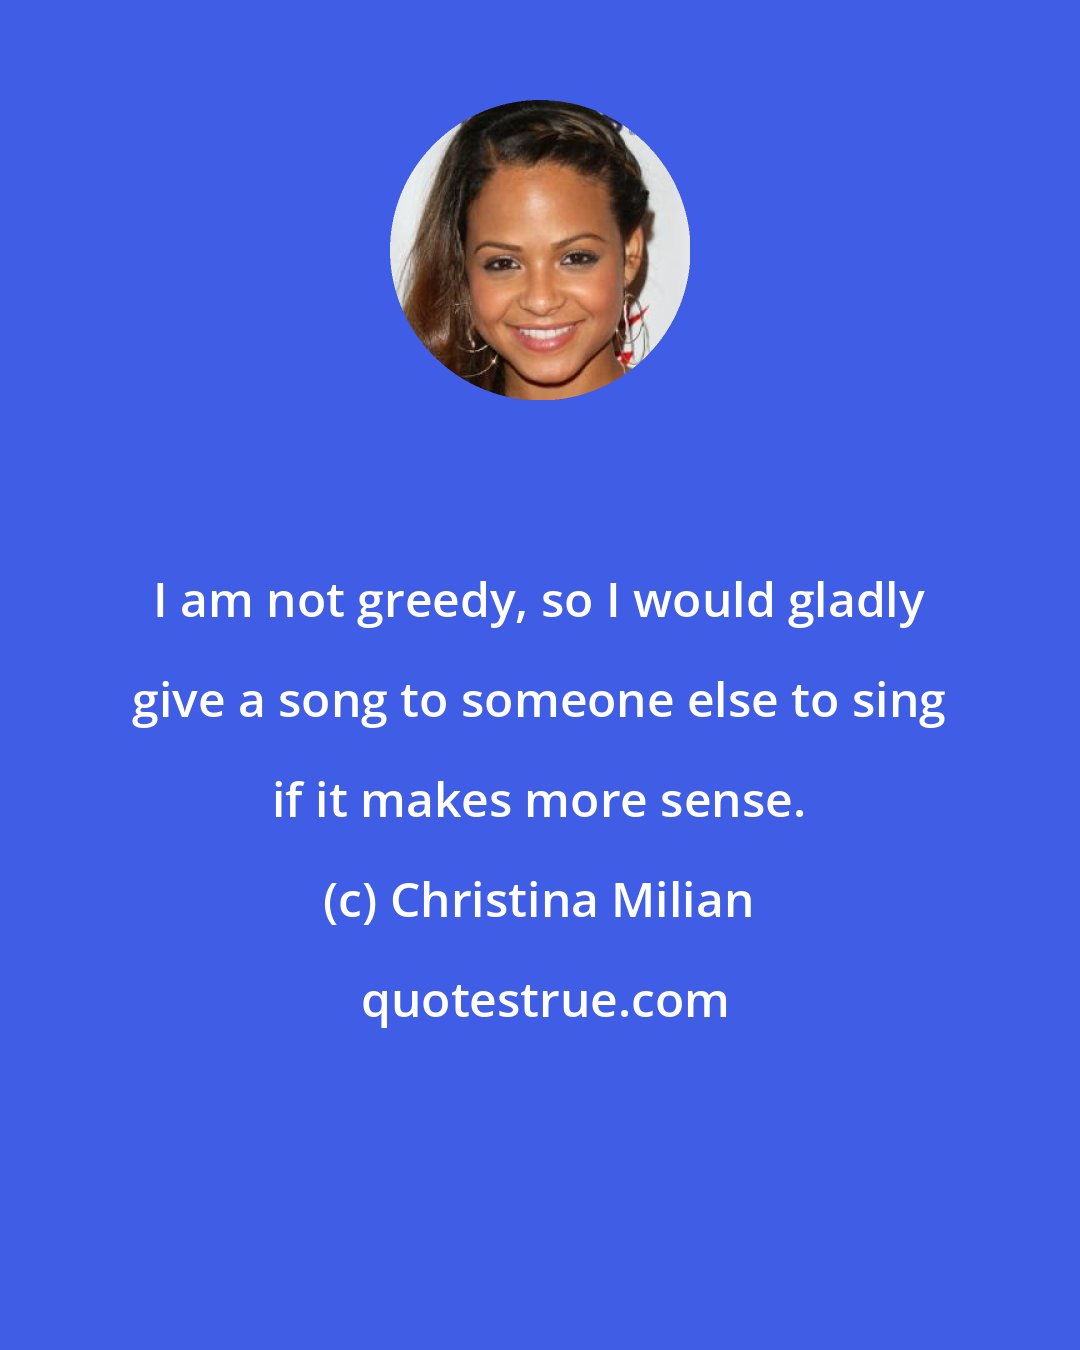 Christina Milian: I am not greedy, so I would gladly give a song to someone else to sing if it makes more sense.